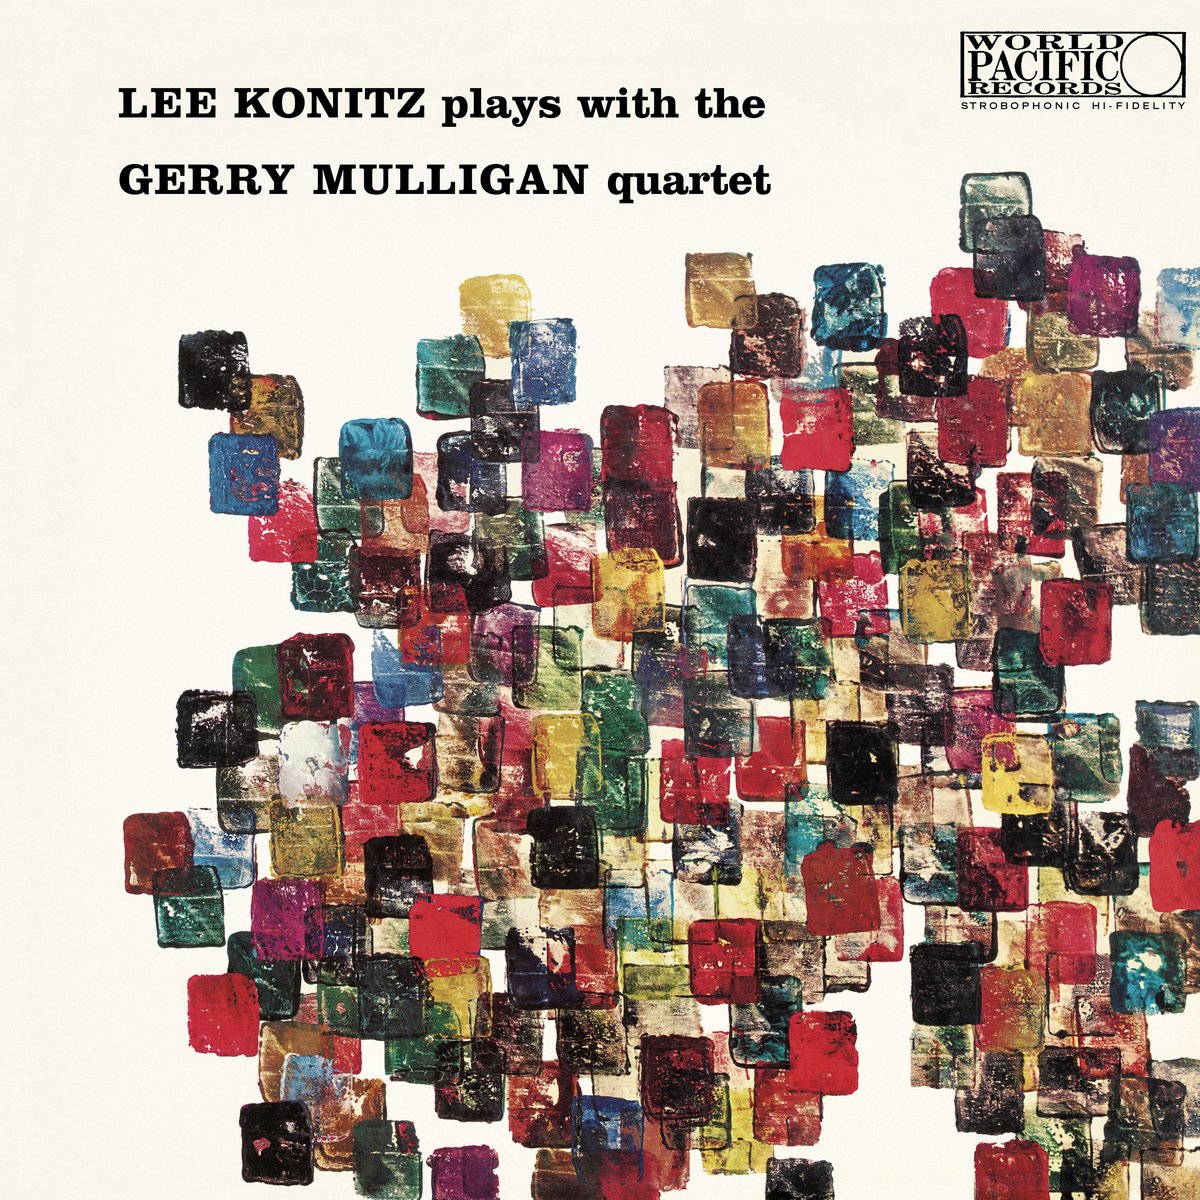 Джаз Blue Note Lee Konitz, Gerry Mulligan - Lee Konitz Plays With The Gerry Mulligan Quartet (Tone Poet Series) джаз blue note griffin johnny introducing johnny griffin